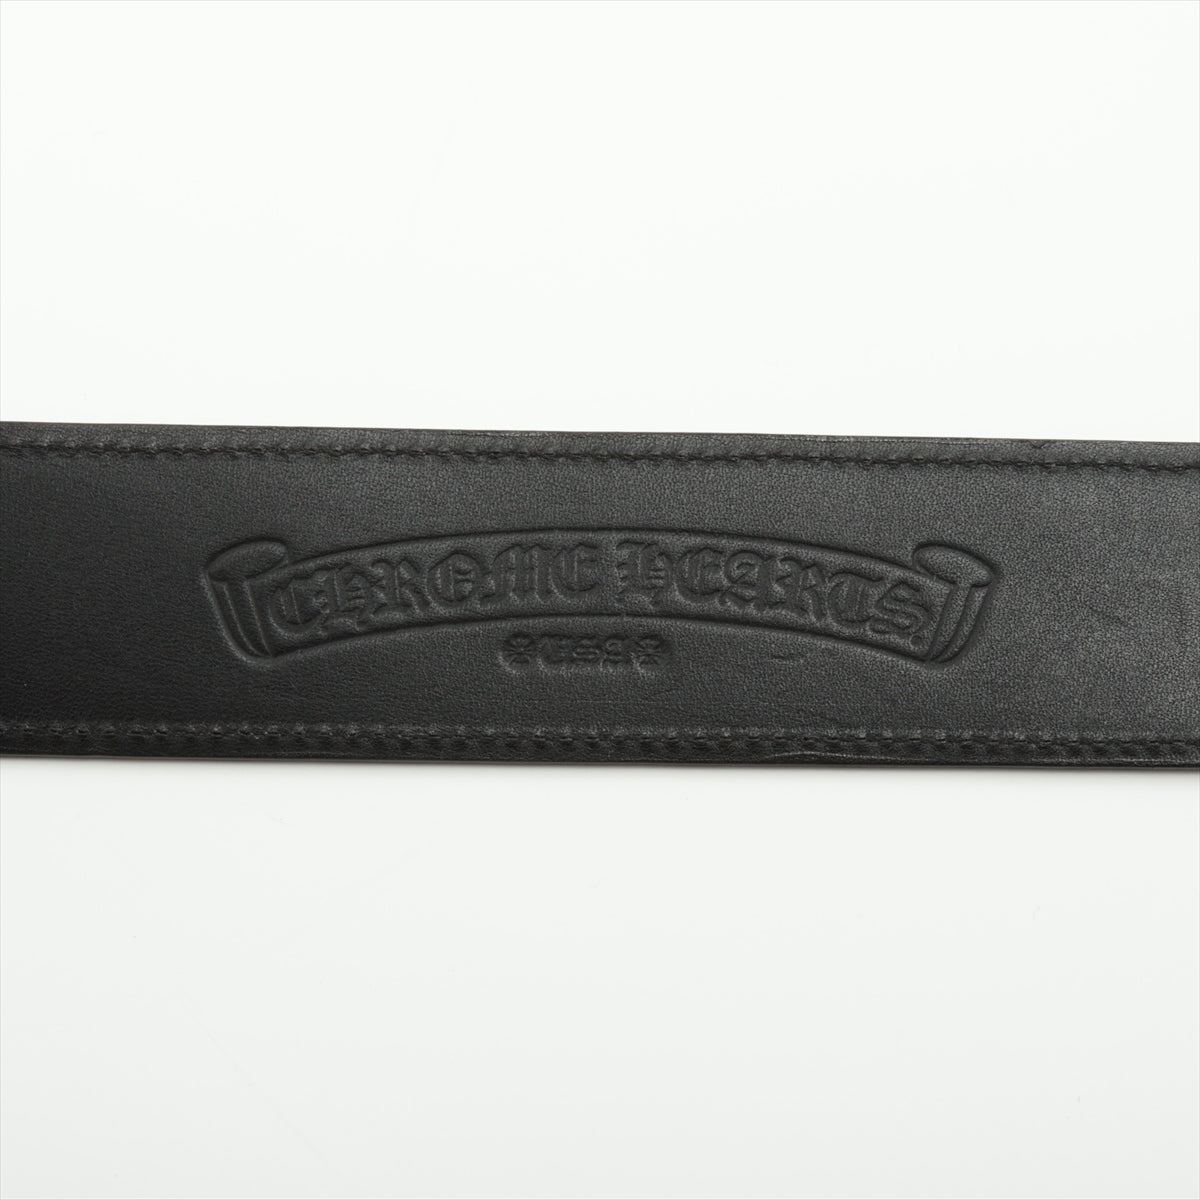 Chrome Hearts Classic Oval Cross Buckle Belt Leather & 925 With invoice size 34 Black × Silver 1.5